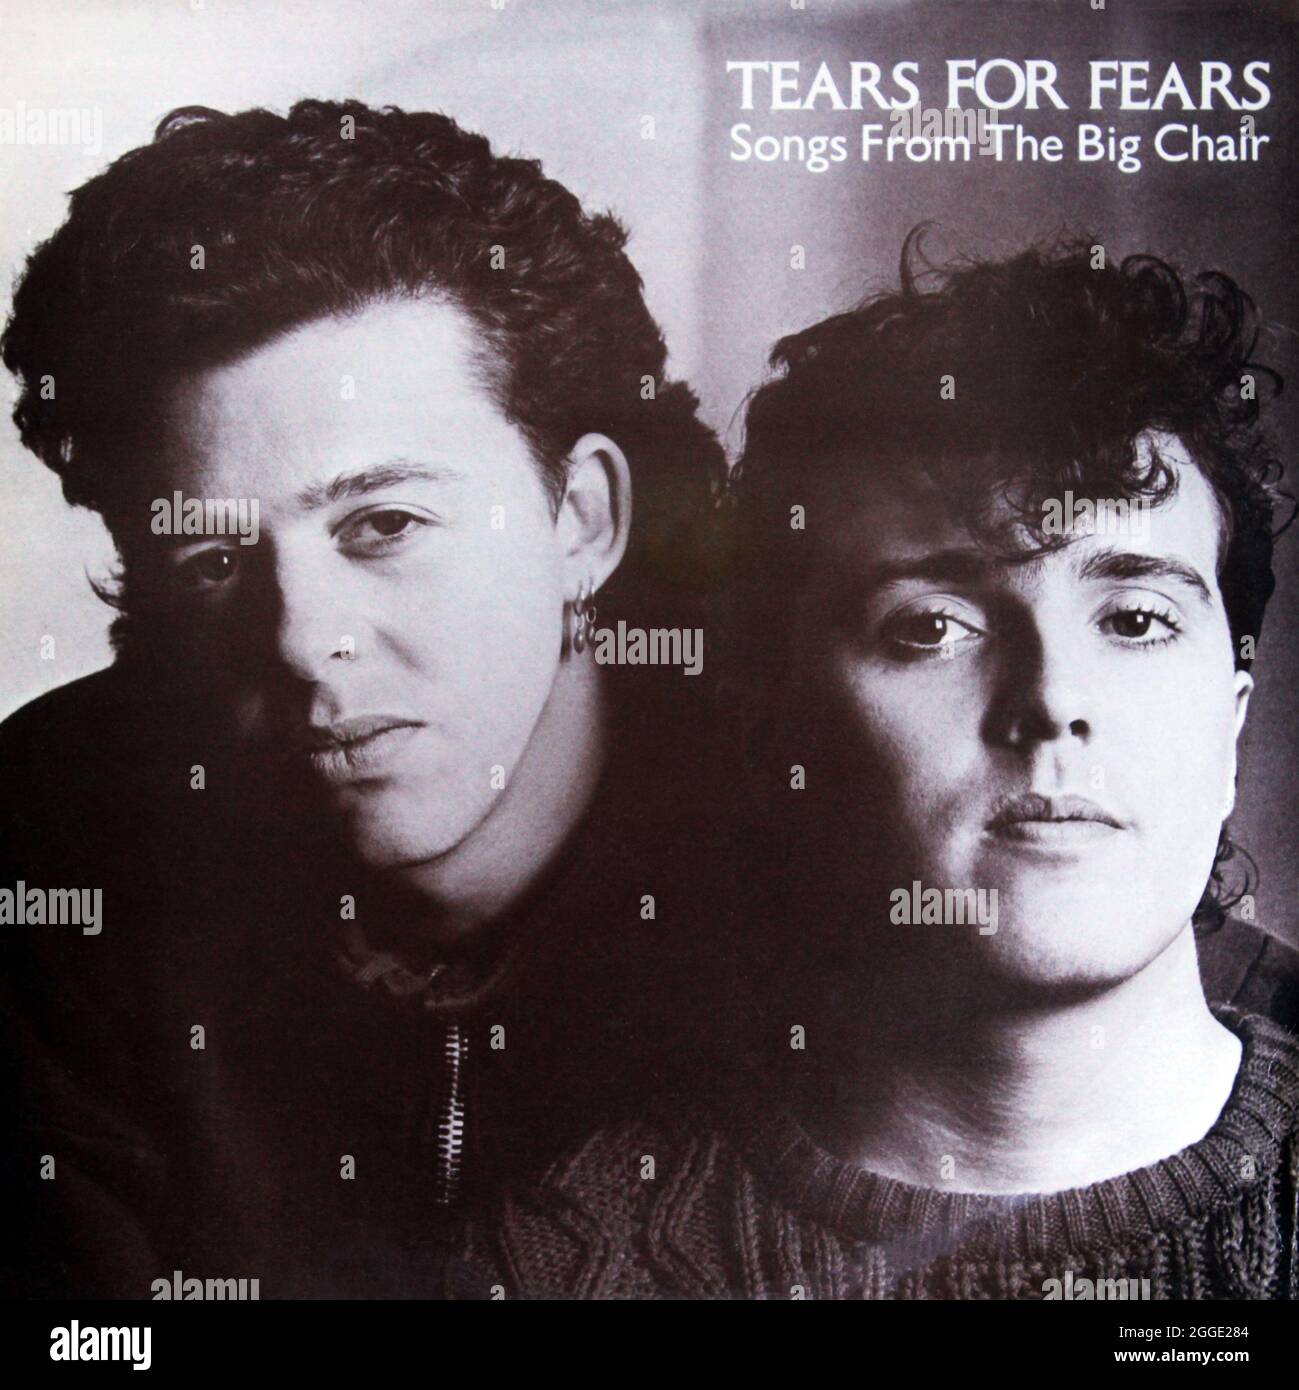 Tears For Fears: 1985. LP front cover: 'Songs Fron The big Chair' Stock Photo